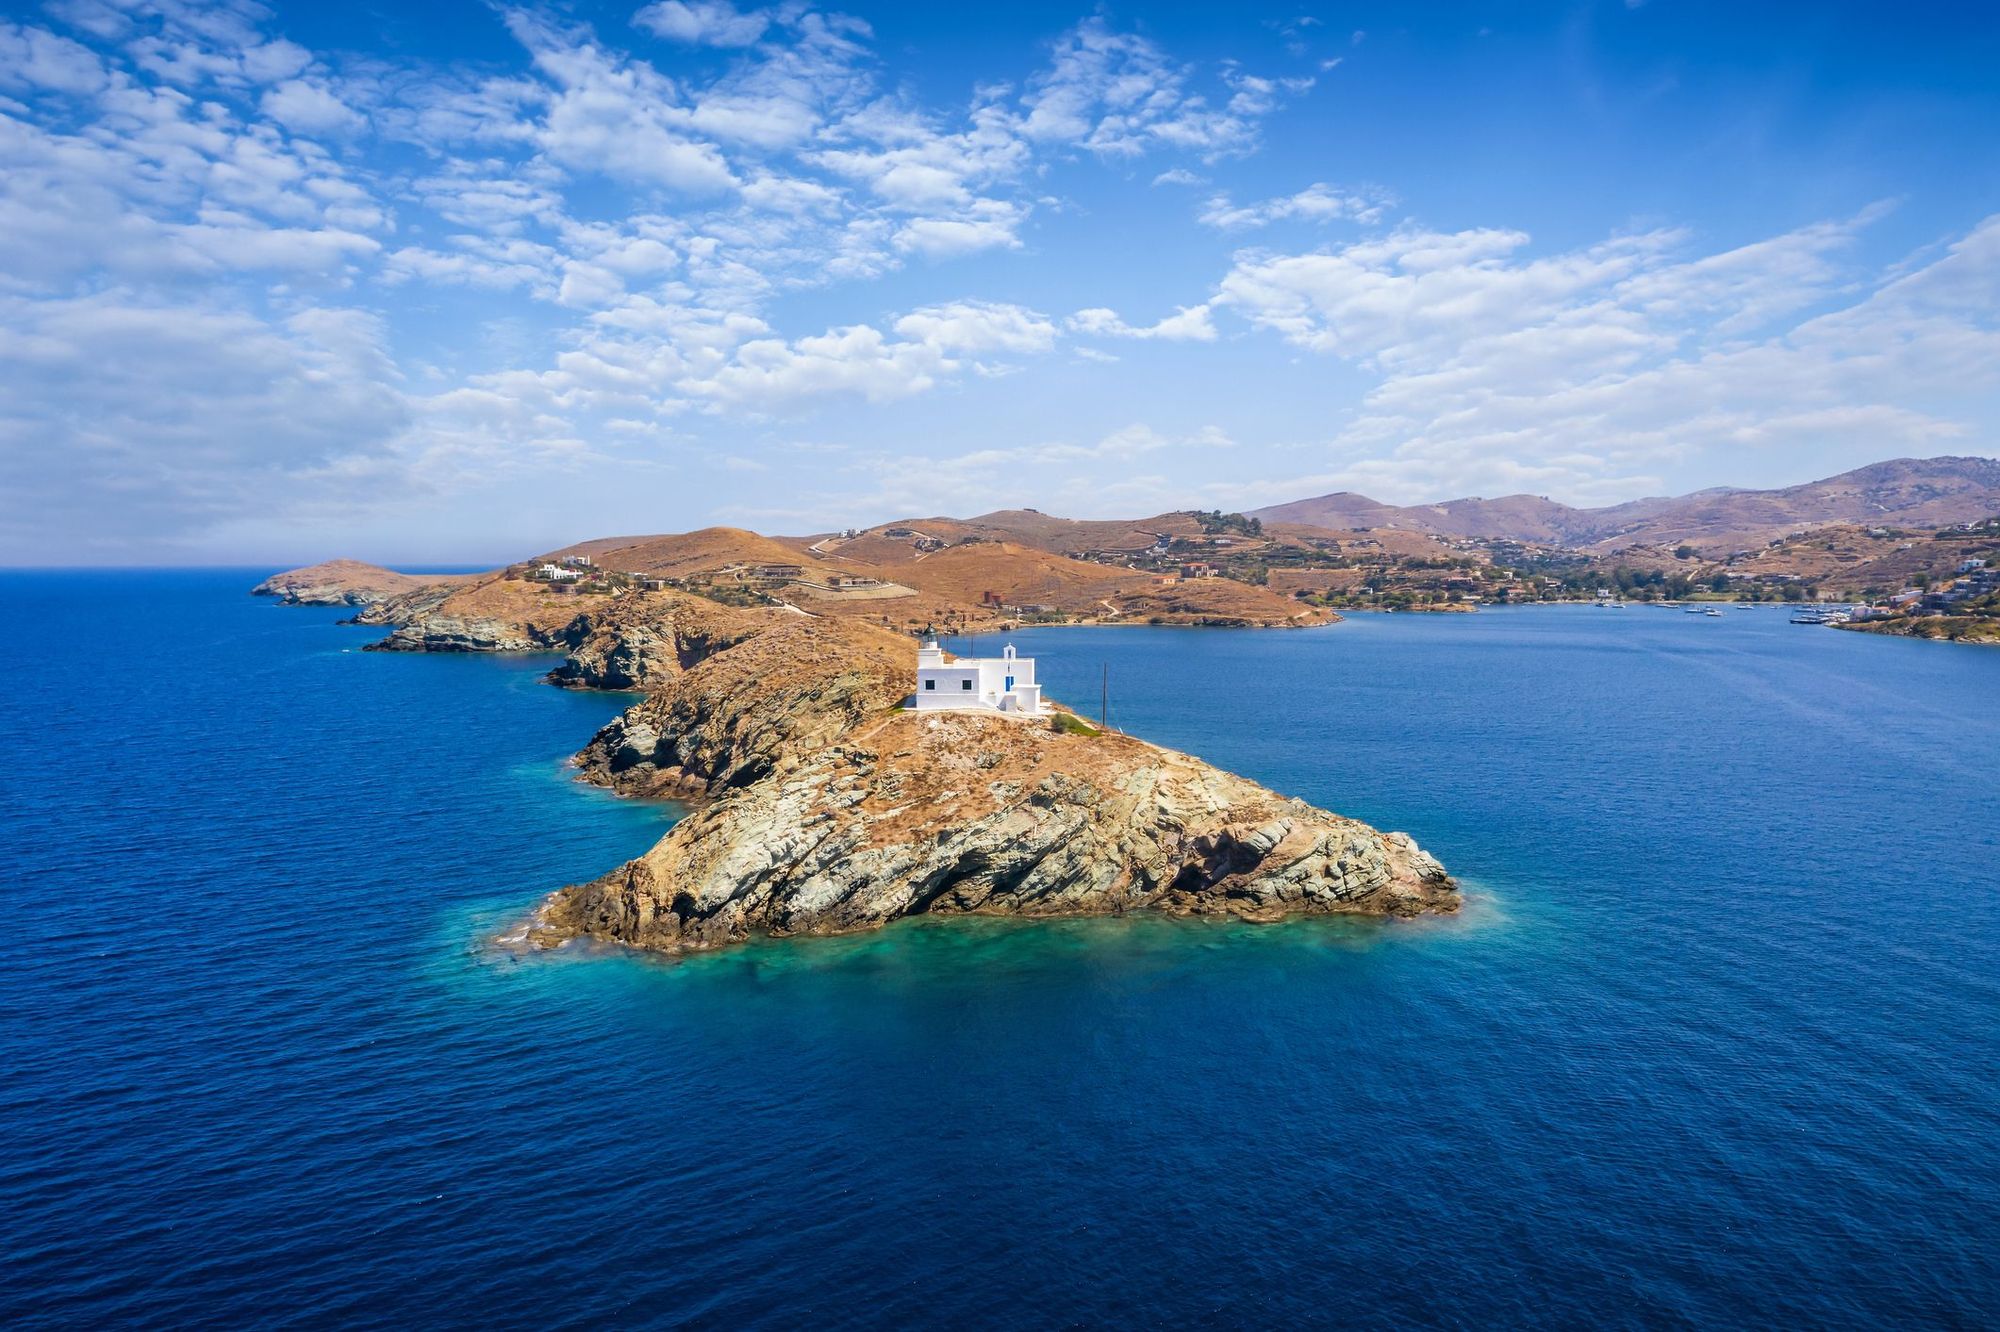 Tzia Lighthouse, on Kea Island in the Cyclades. Photo: Getty.